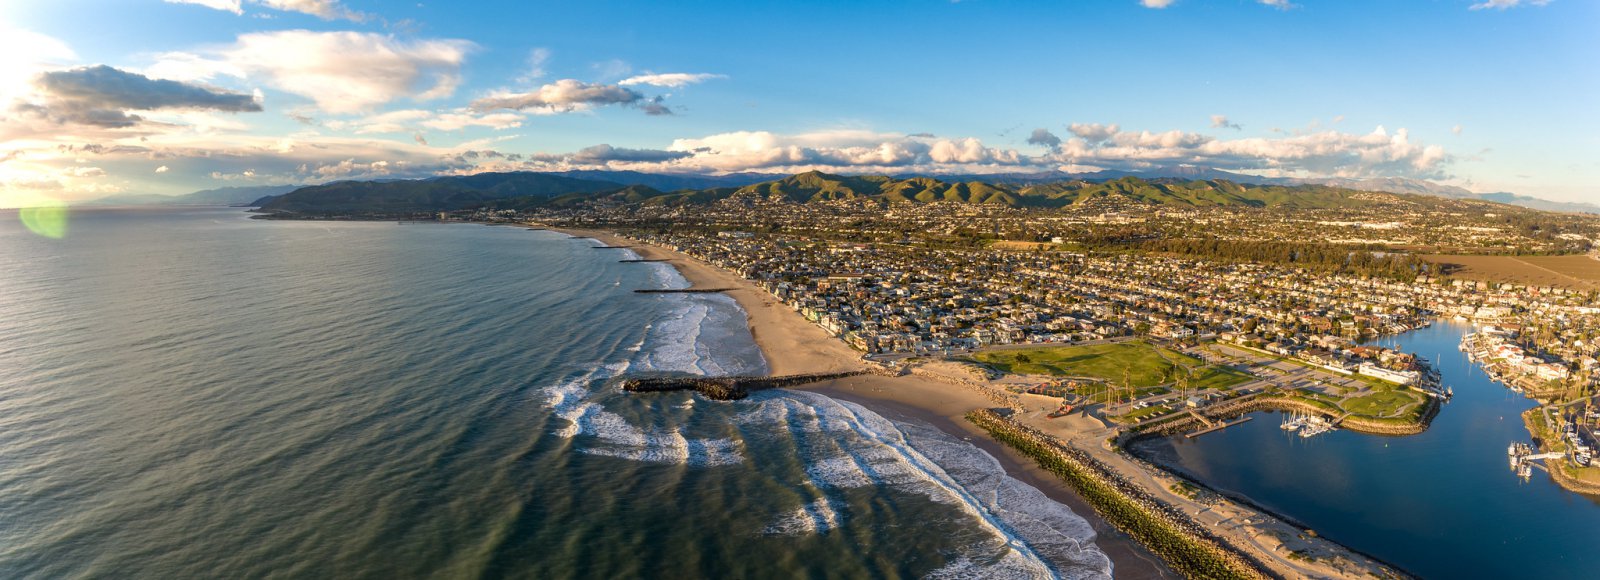 14 Reasons Why Ventura is Your Affordable Beach Destination